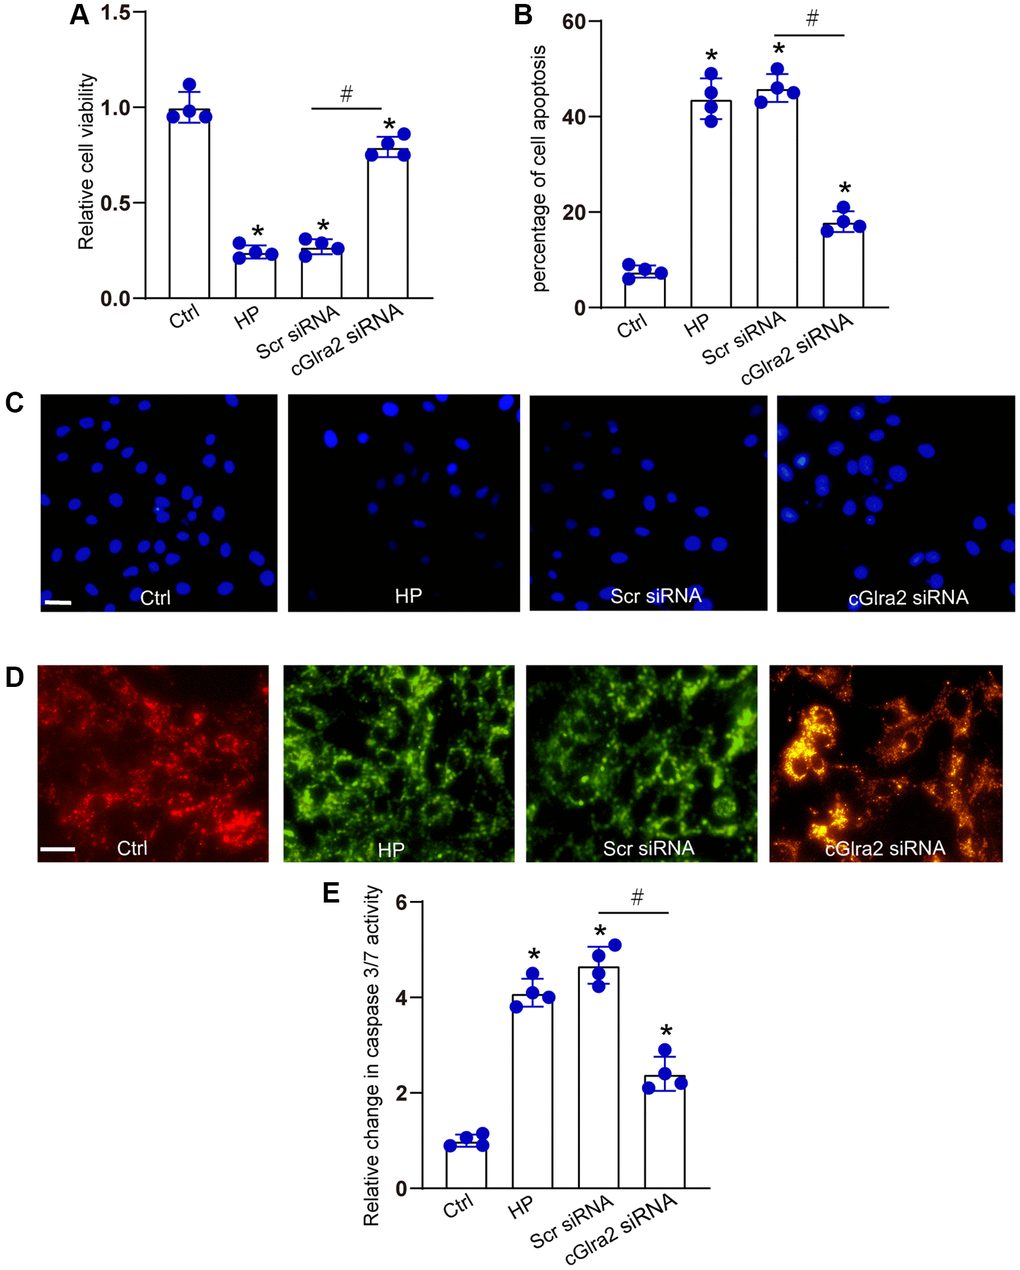 Silencing of cGlra2 protects against hydrostatic stress-induced RGC injury. RGCs were maintained under the elevated hydrostatic pressure (70 mm Hg) to induce hydrostatic stress. RGCs maintained at the ambient pressure were taken as the control group. RGCs were transfected with Scr siRNA, cGlra2 siRNA, or left untreated (Ctrl) for 12 h, and then accepted hydrostatic stress for additional 36 h. CCK-8 assays were performed to detect the viability of RGCs (A, n = 4). Hoechst staining and quantification analysis was performed to detect the changes of nuclei morphological characteristics of RGCs (B and C, n = 4, Scale bar: 50 μm). JC-1 staining was performed to change of mitochondrial depolarization in RGCs (D, n = 4, Scale bar: 50 μm). Caspase 3/7 activity was performed to detect the degree of RGC apoptosis (E, n = 4). *P #P 